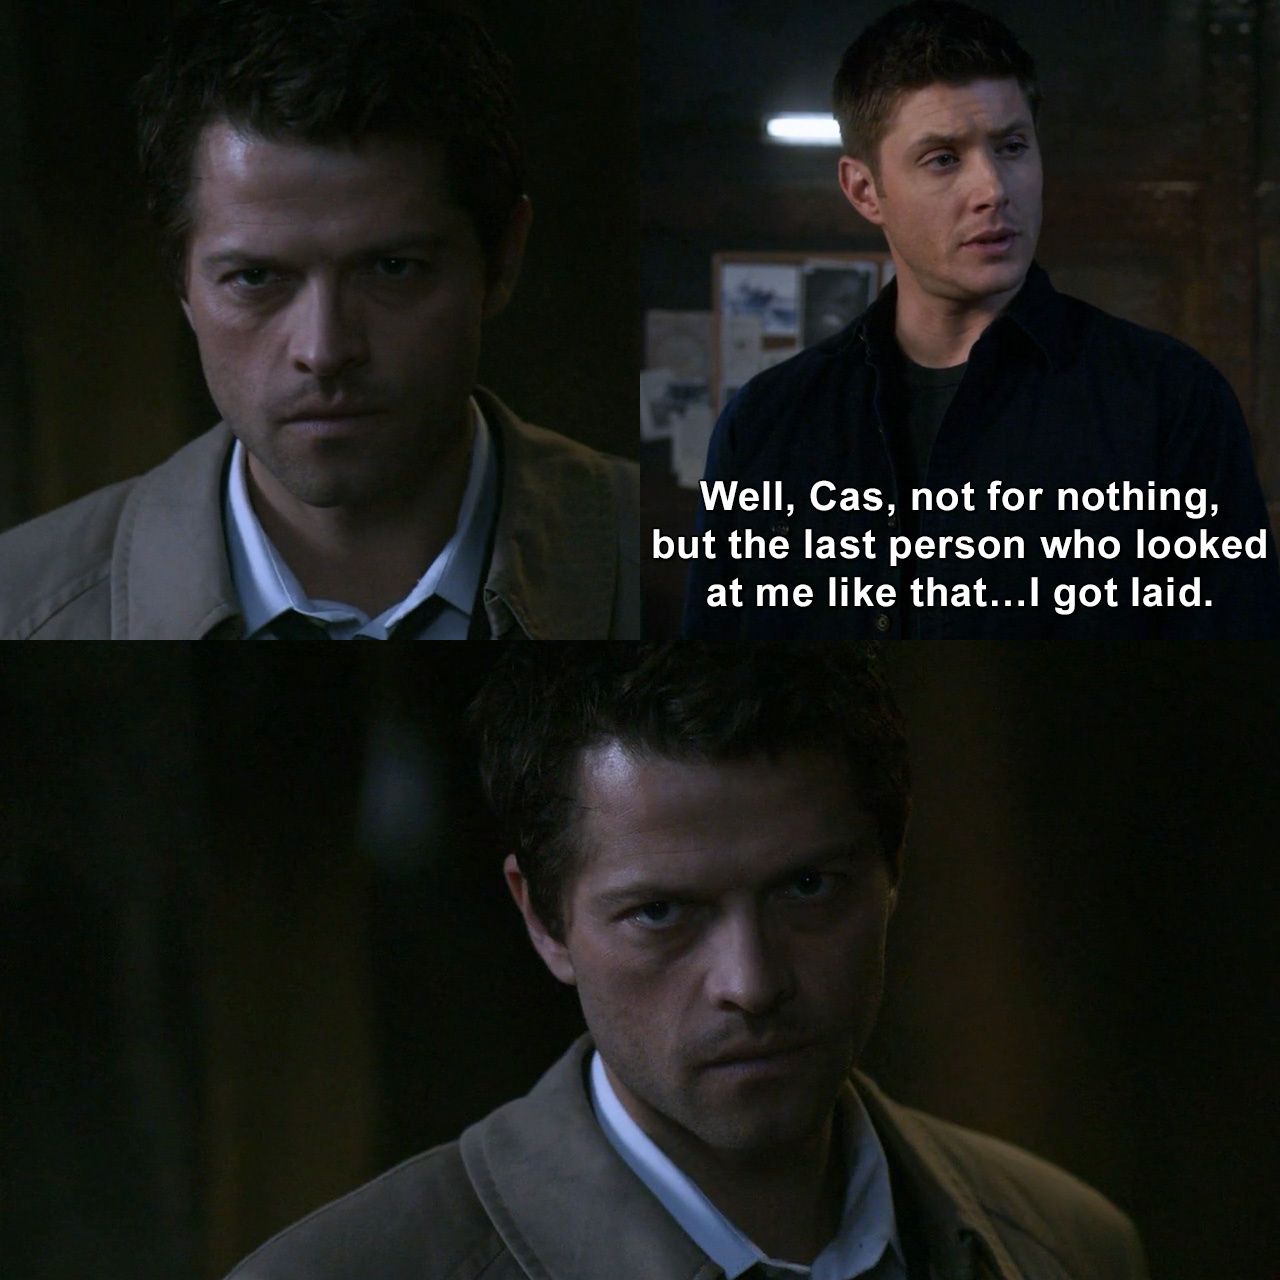 Well, Cas, not for nothing, but the last person who looked at me like ...